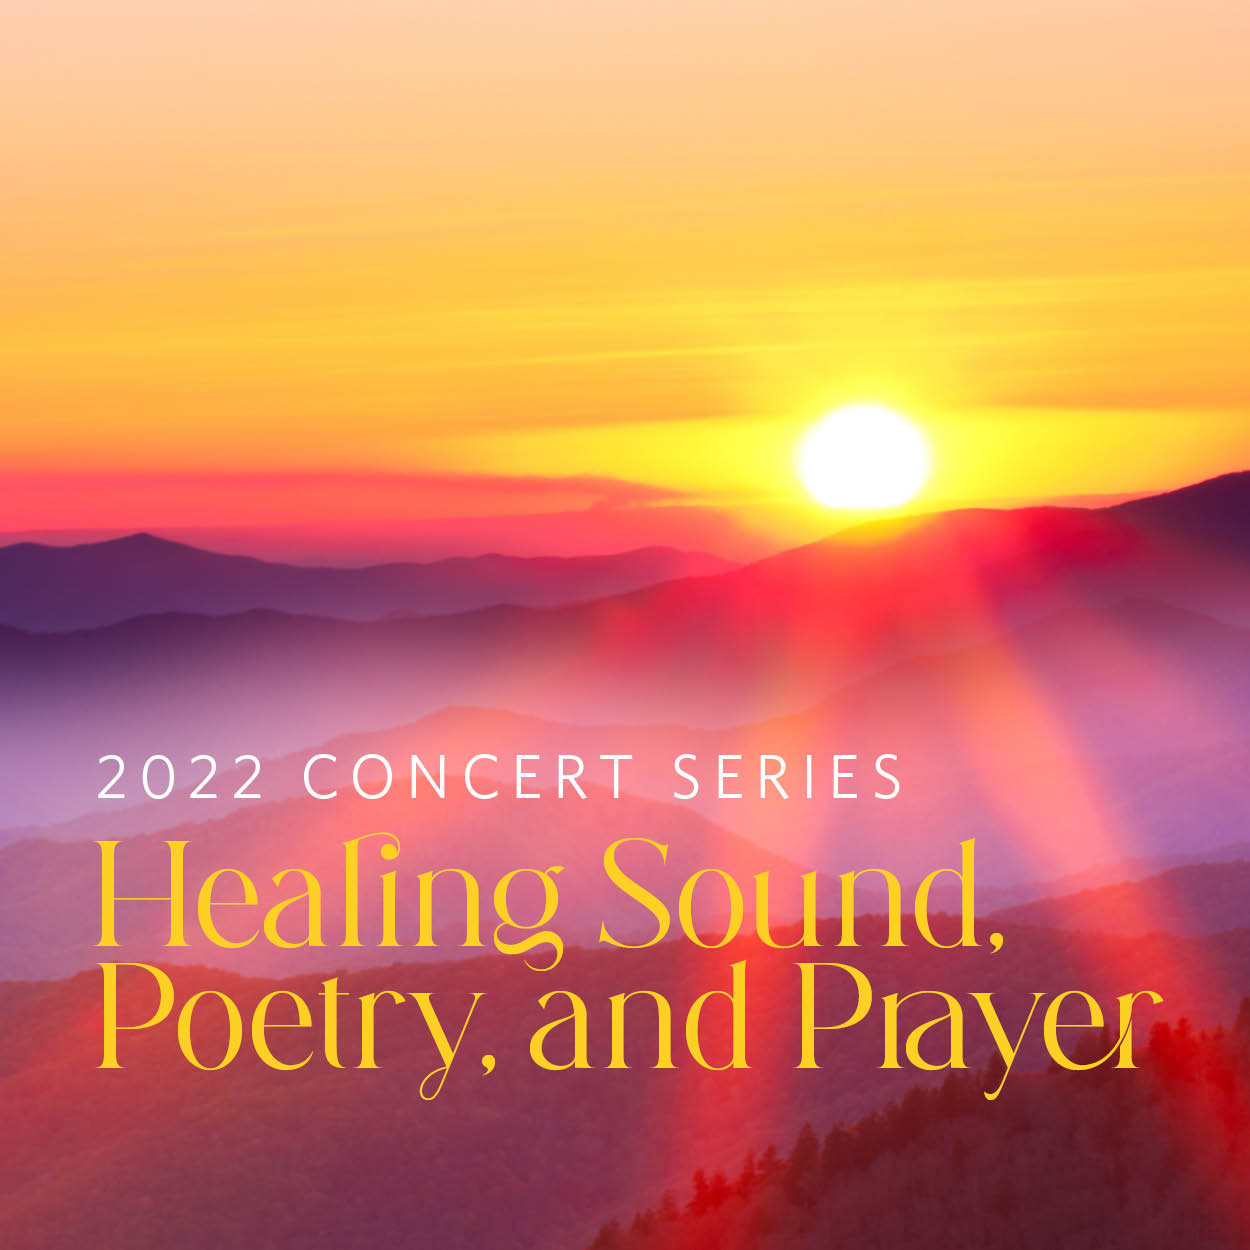 2022 Concert Series: Healing Sound, Poetry, and Prayer